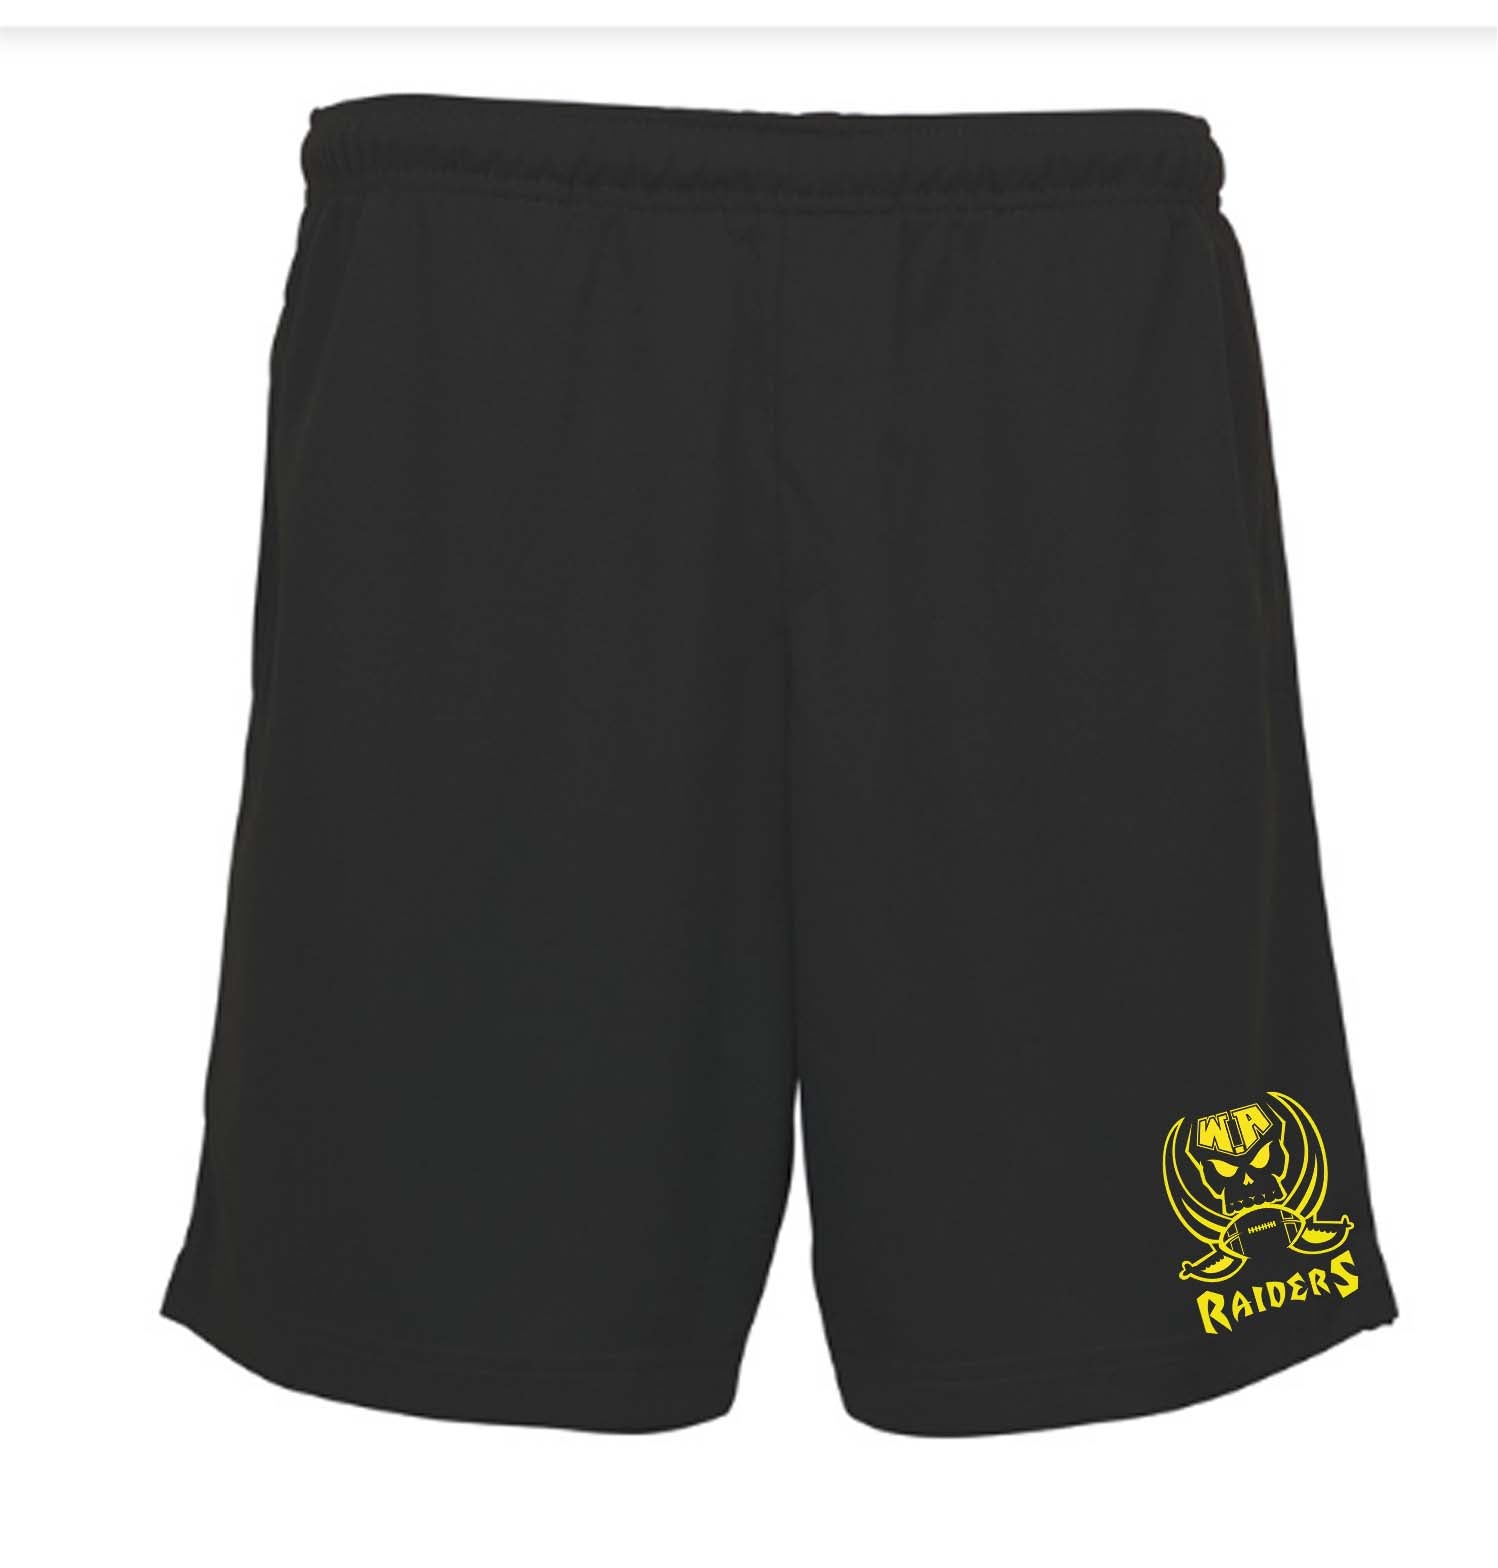 GW RAIDERS BASKETBALL STYLE SHORTS WITH POCKETS